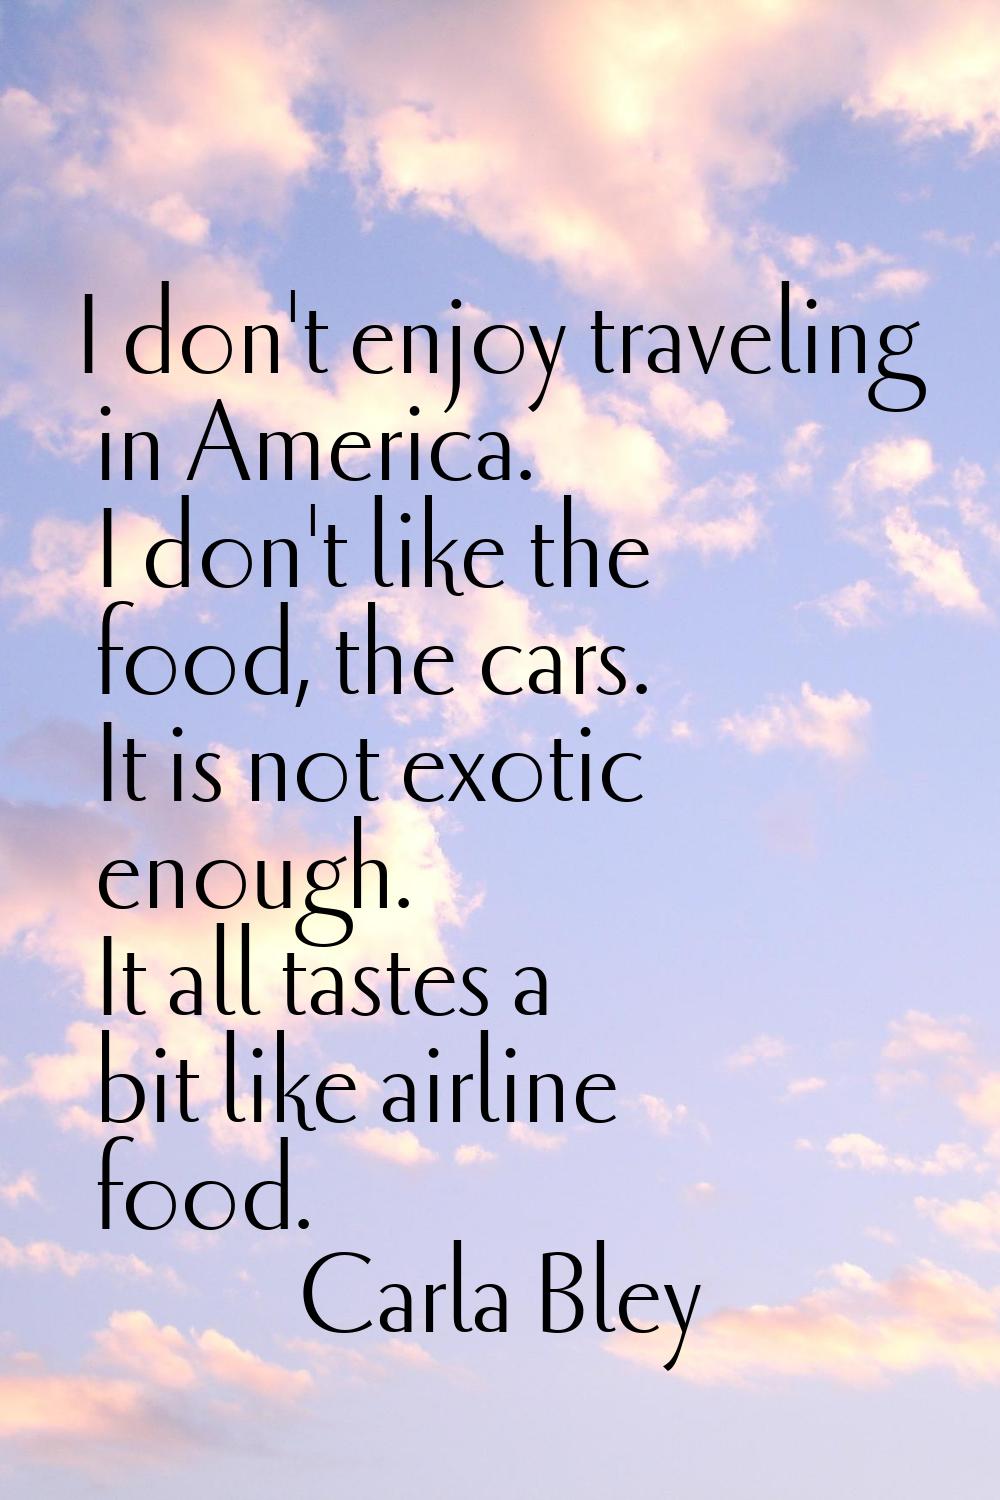 I don't enjoy traveling in America. I don't like the food, the cars. It is not exotic enough. It al